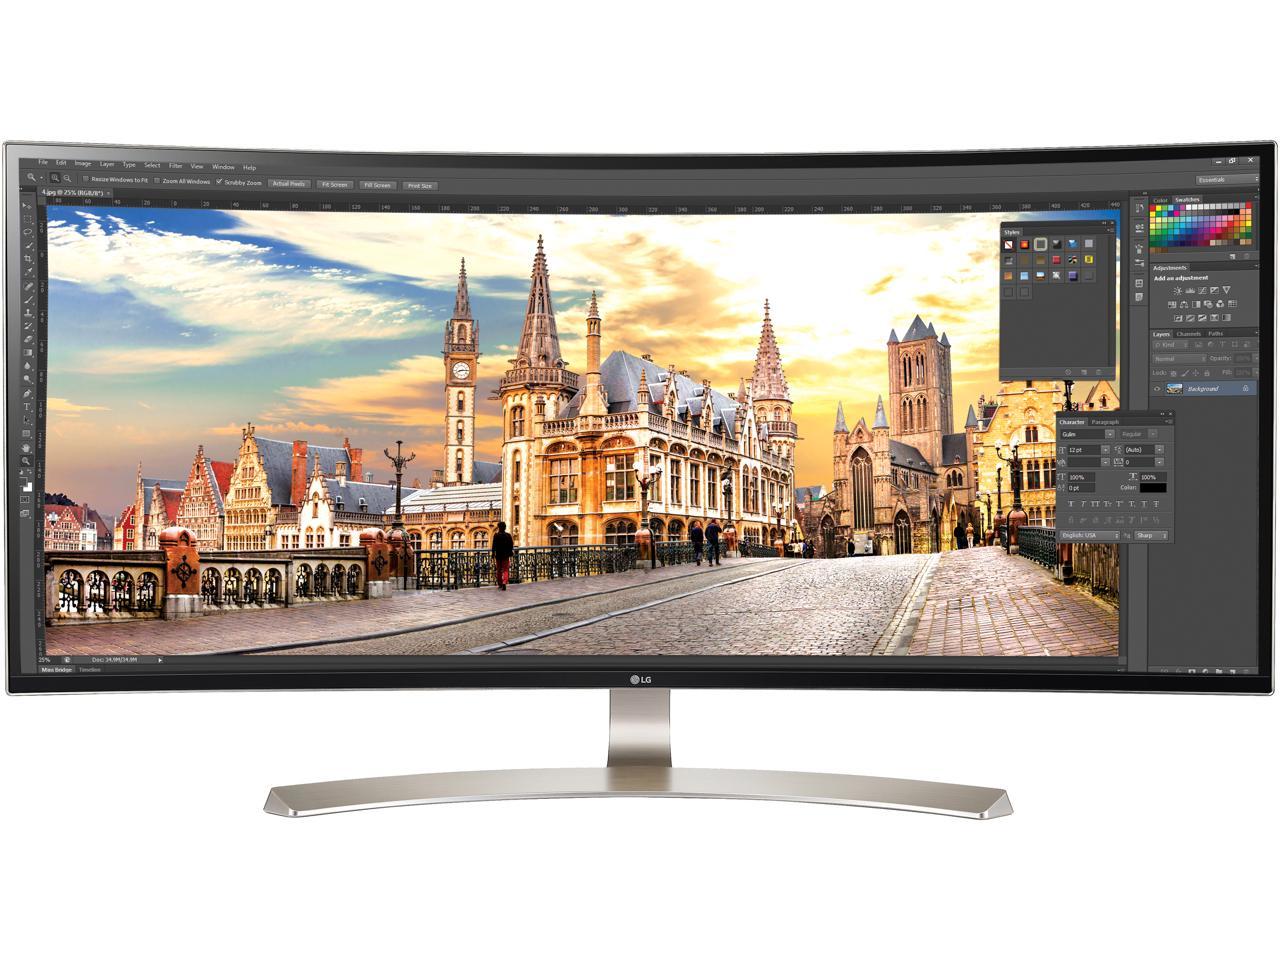 LG 38UC99-W 38" Class 21:9 3840 x 1600 UltraWide IPS Curved Monitor, FreeSync, 1ms Motion Blur Reduction, Built-in Speakers